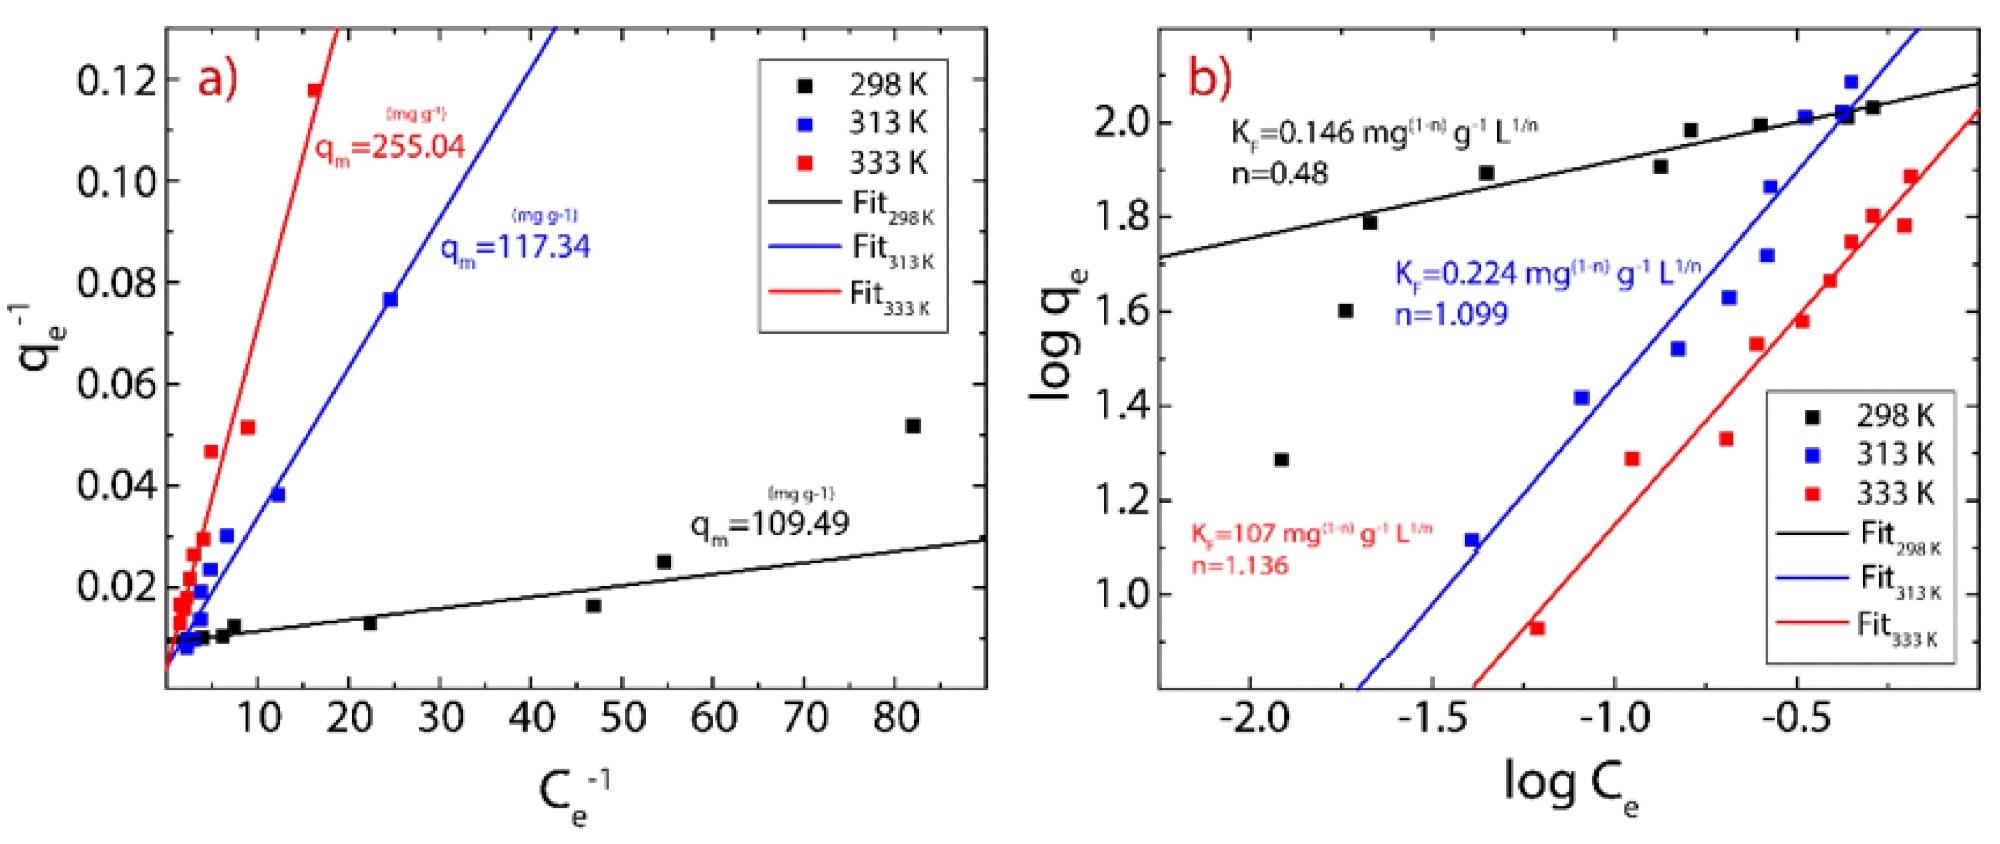 Adsorption isotherm of Hg(II) on rGO considering three different temperatures (289-333 K). (a) Langmuir model and (b) Freundlich model.